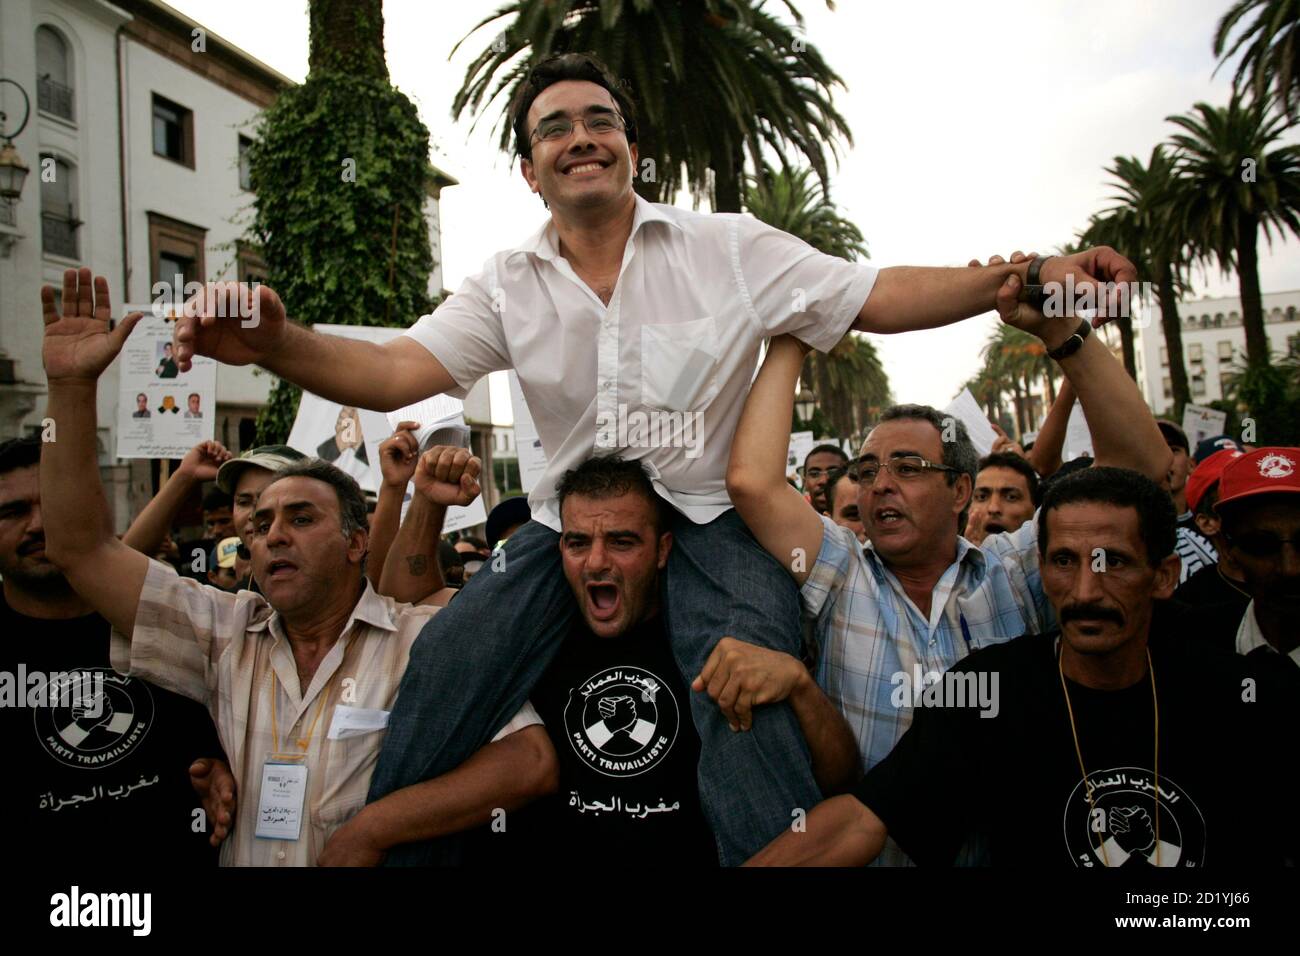 Supporters of the Labour Party carry their leader, Abdelkrim Ben Atique, during a march in Rabat September 1, 2007.  Parliamentary elections in Morocco will be held on September 7. REUTERS/Rafael Marchante (MOROCCO) Stock Photo